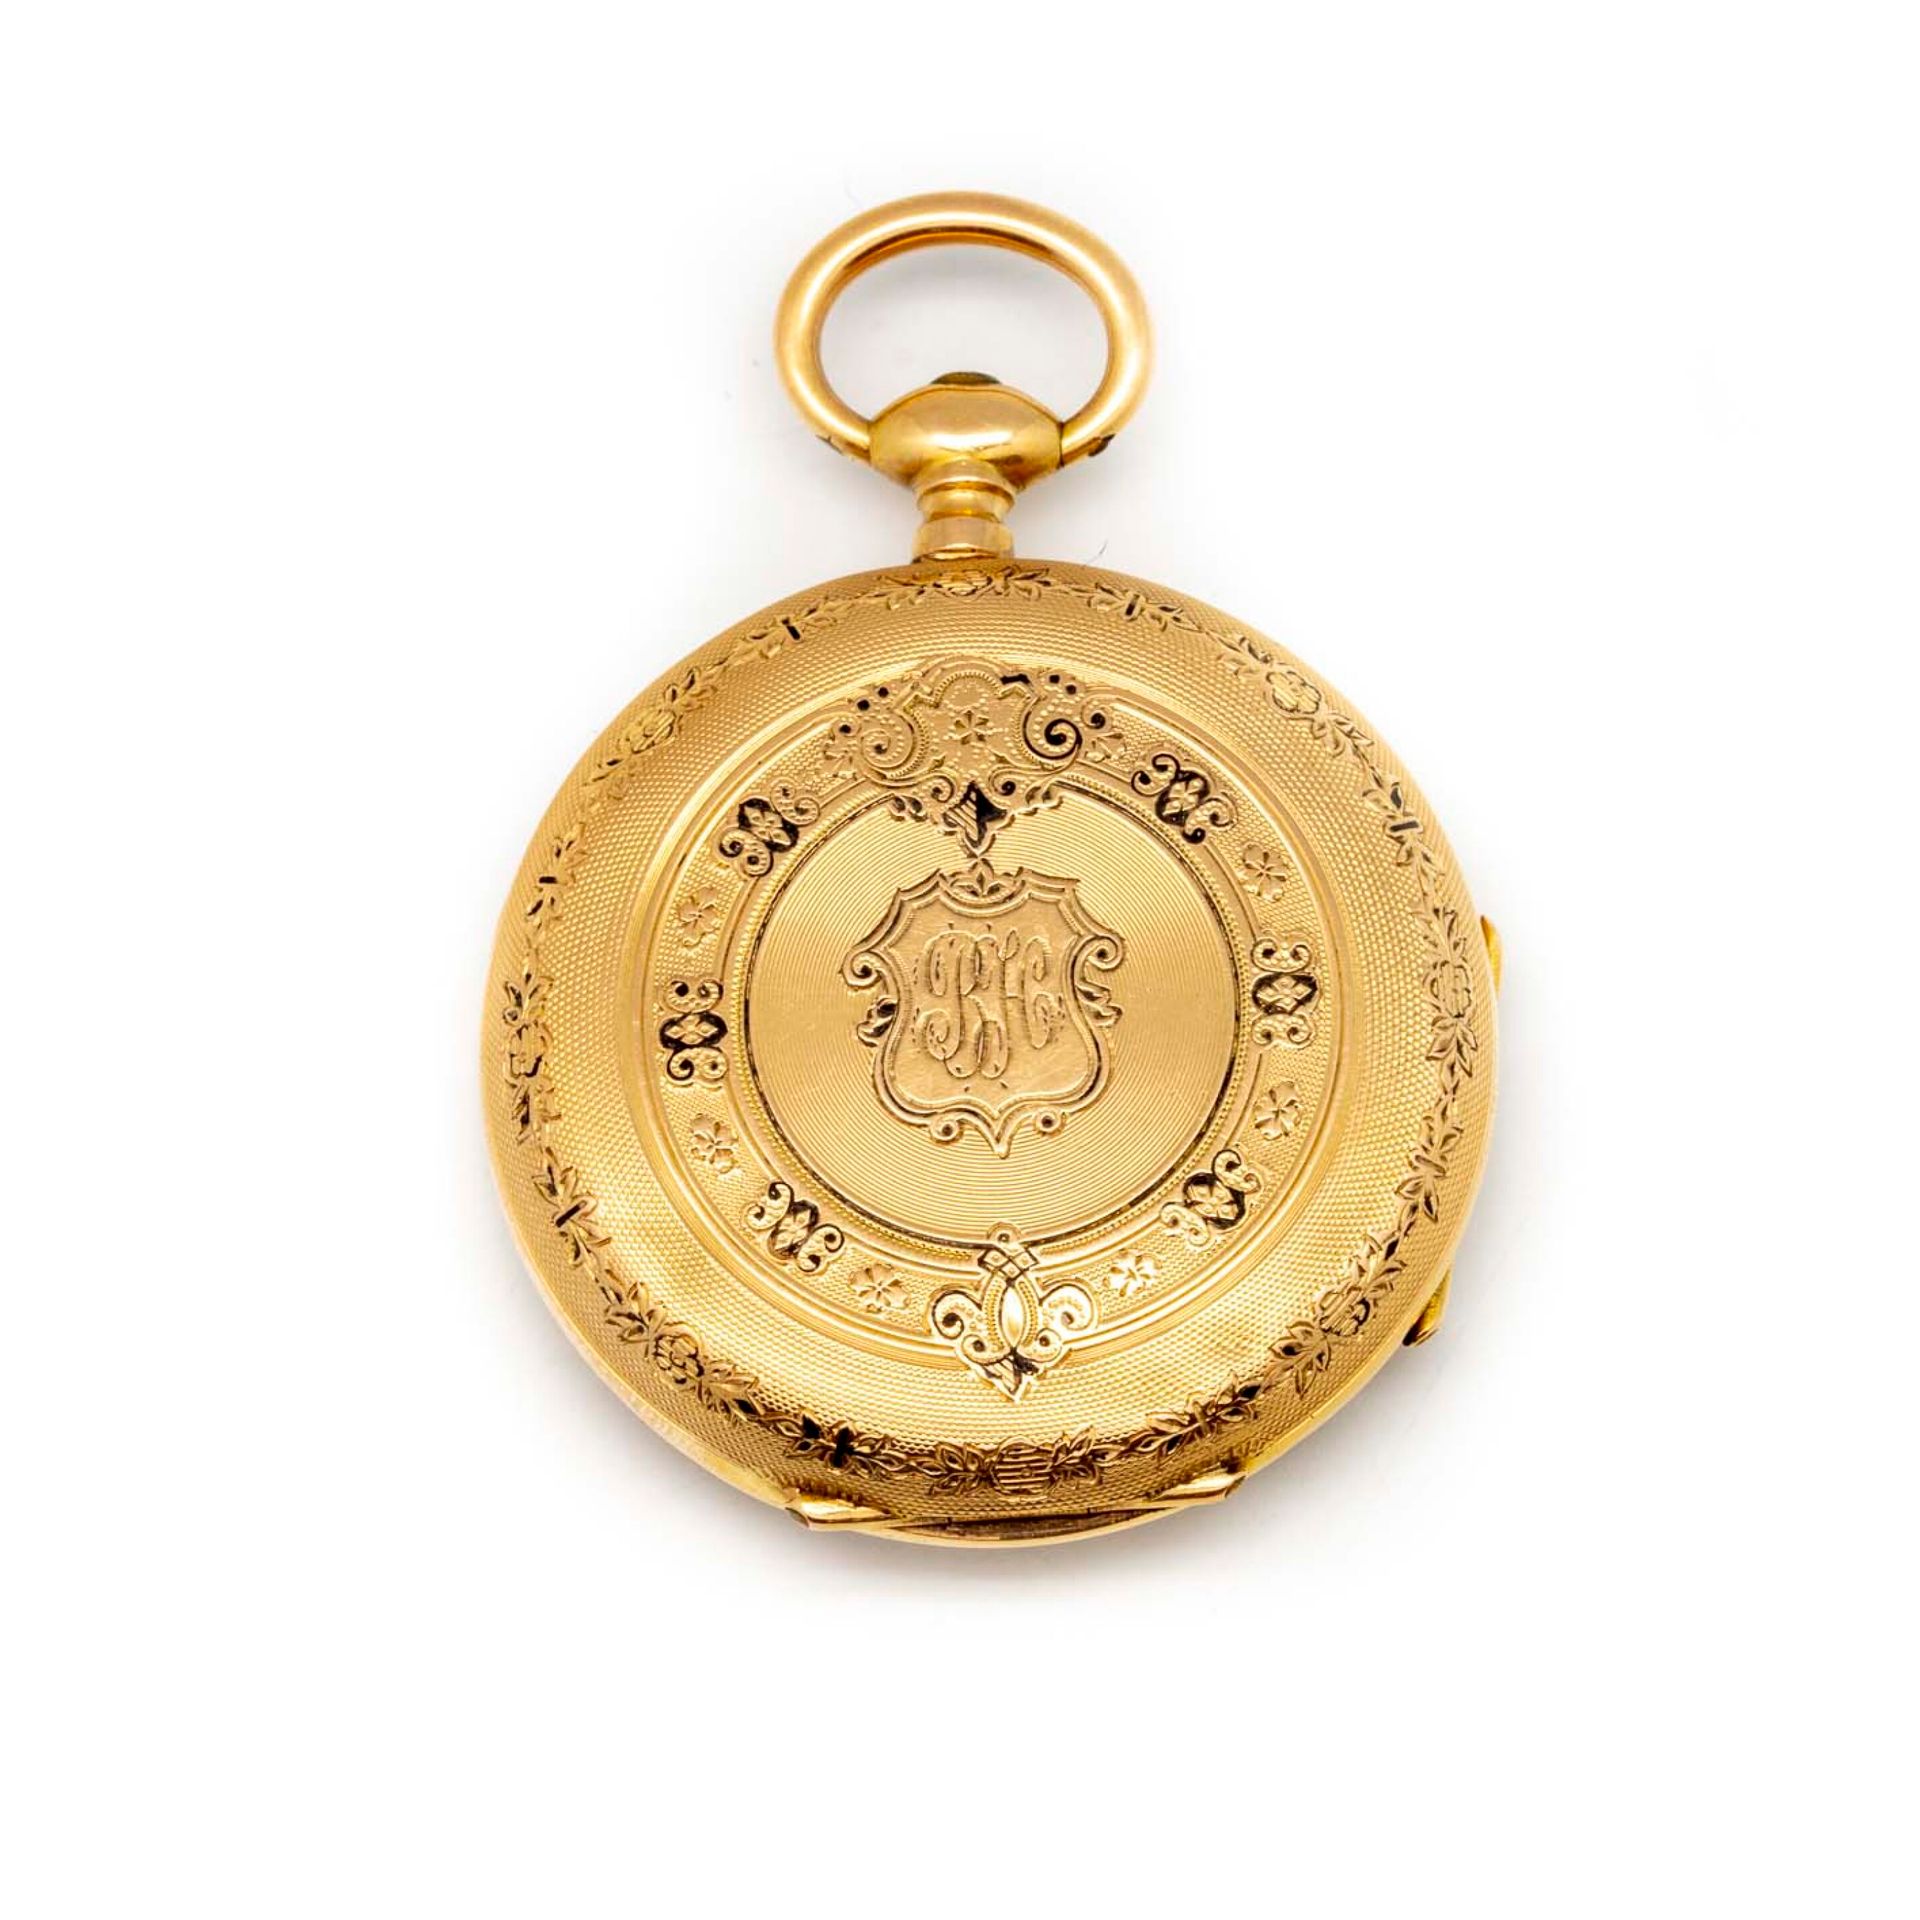 Null Lady's watch in yellow gold in its case with key

Gross weight: 24.5 g.